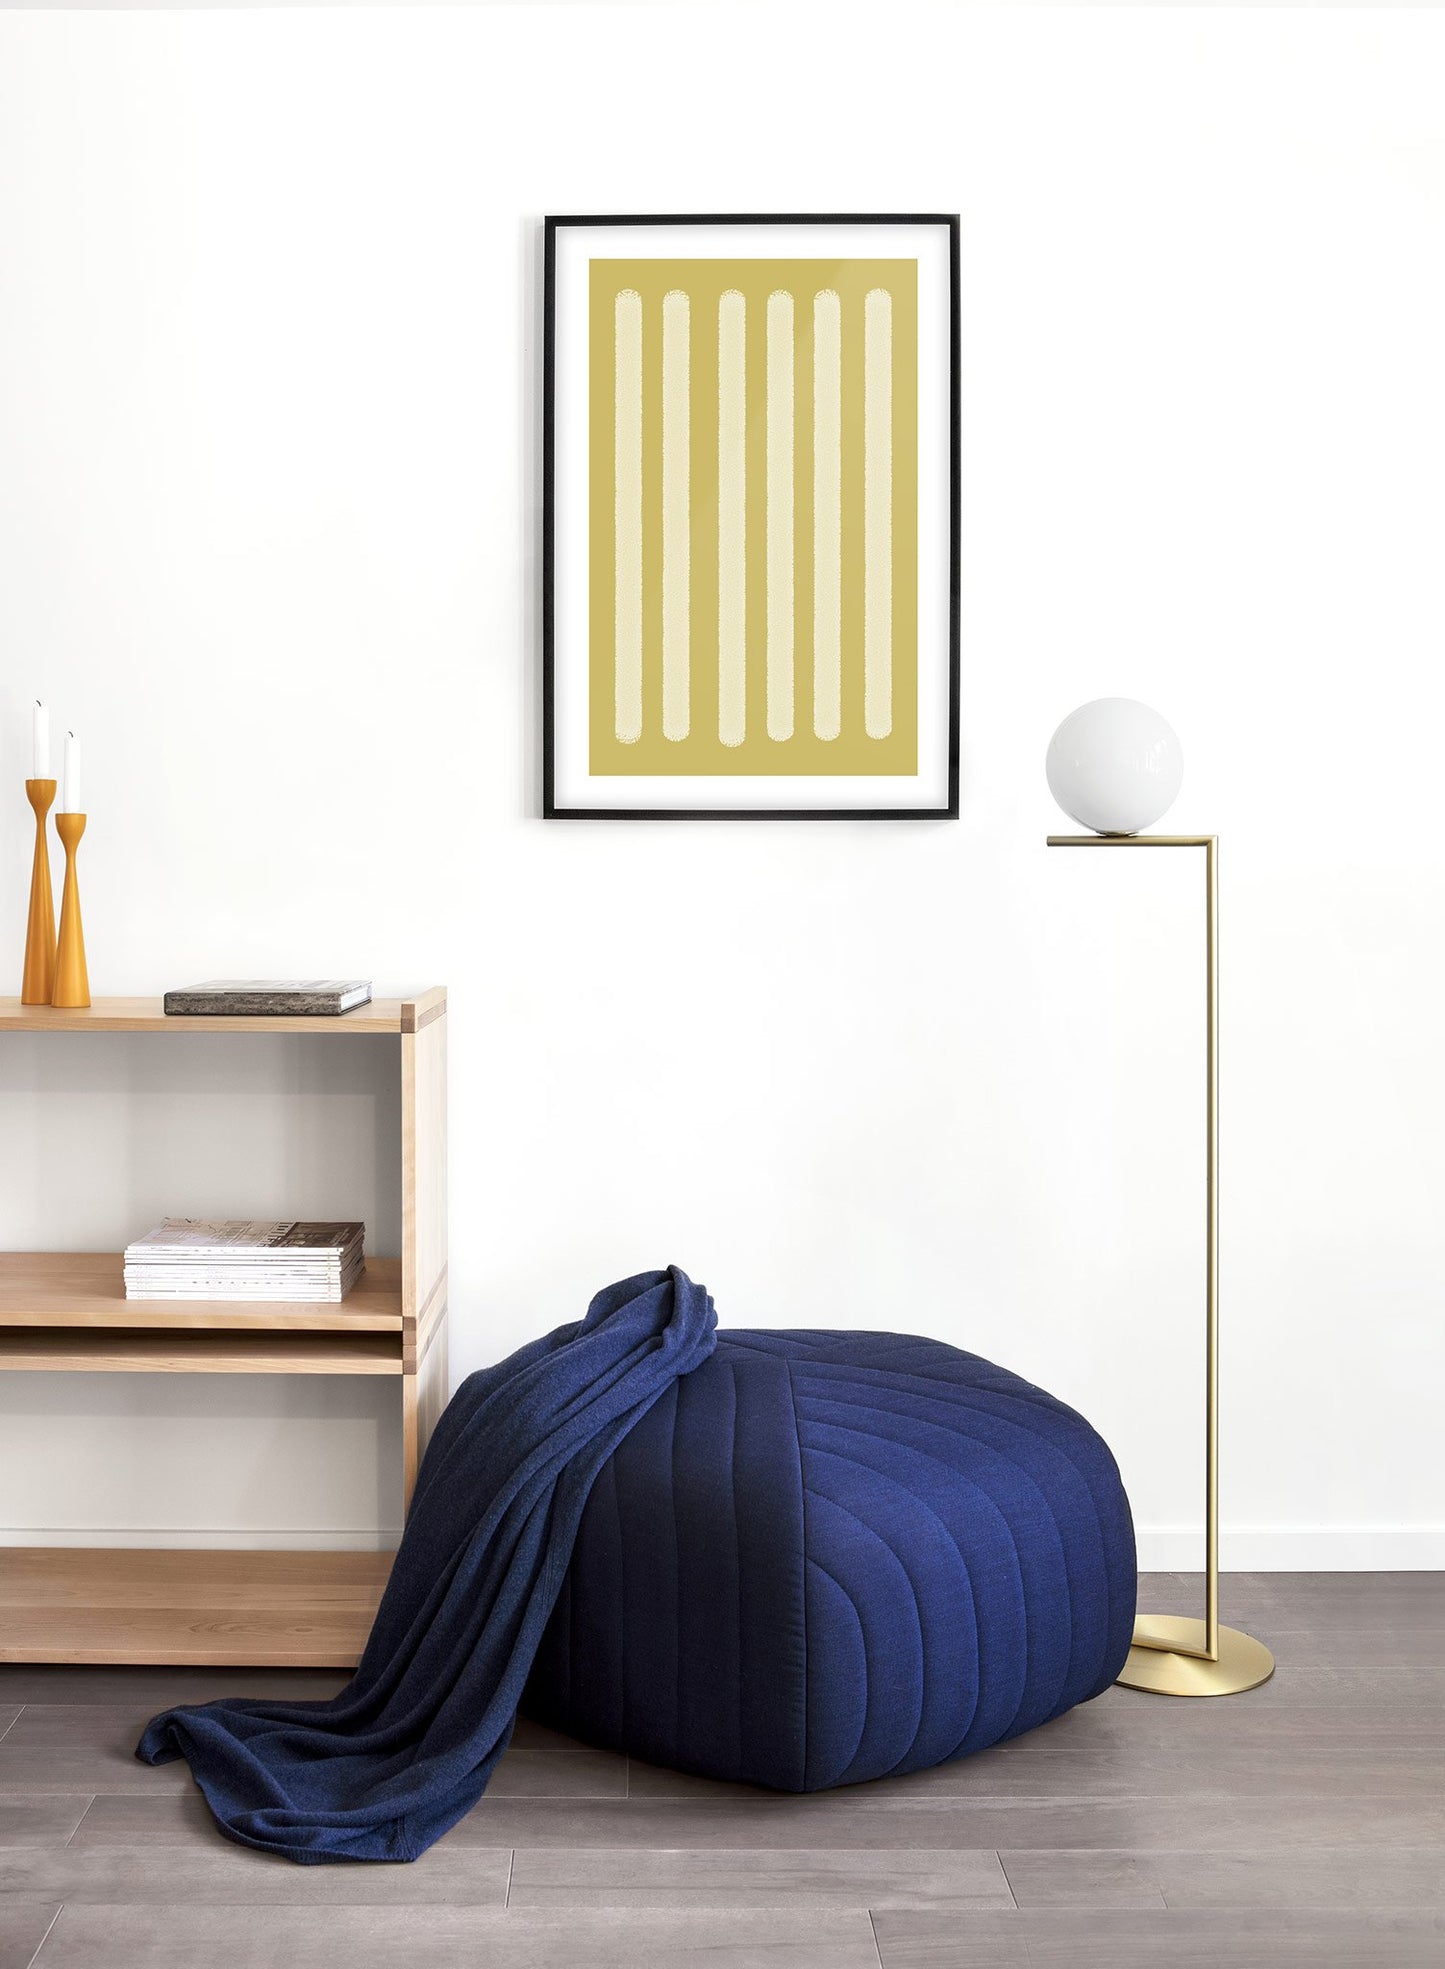 Minimalist design poster by Opposite Wall with abstract yellow rectangle shapes - Lifestyle - Living Room